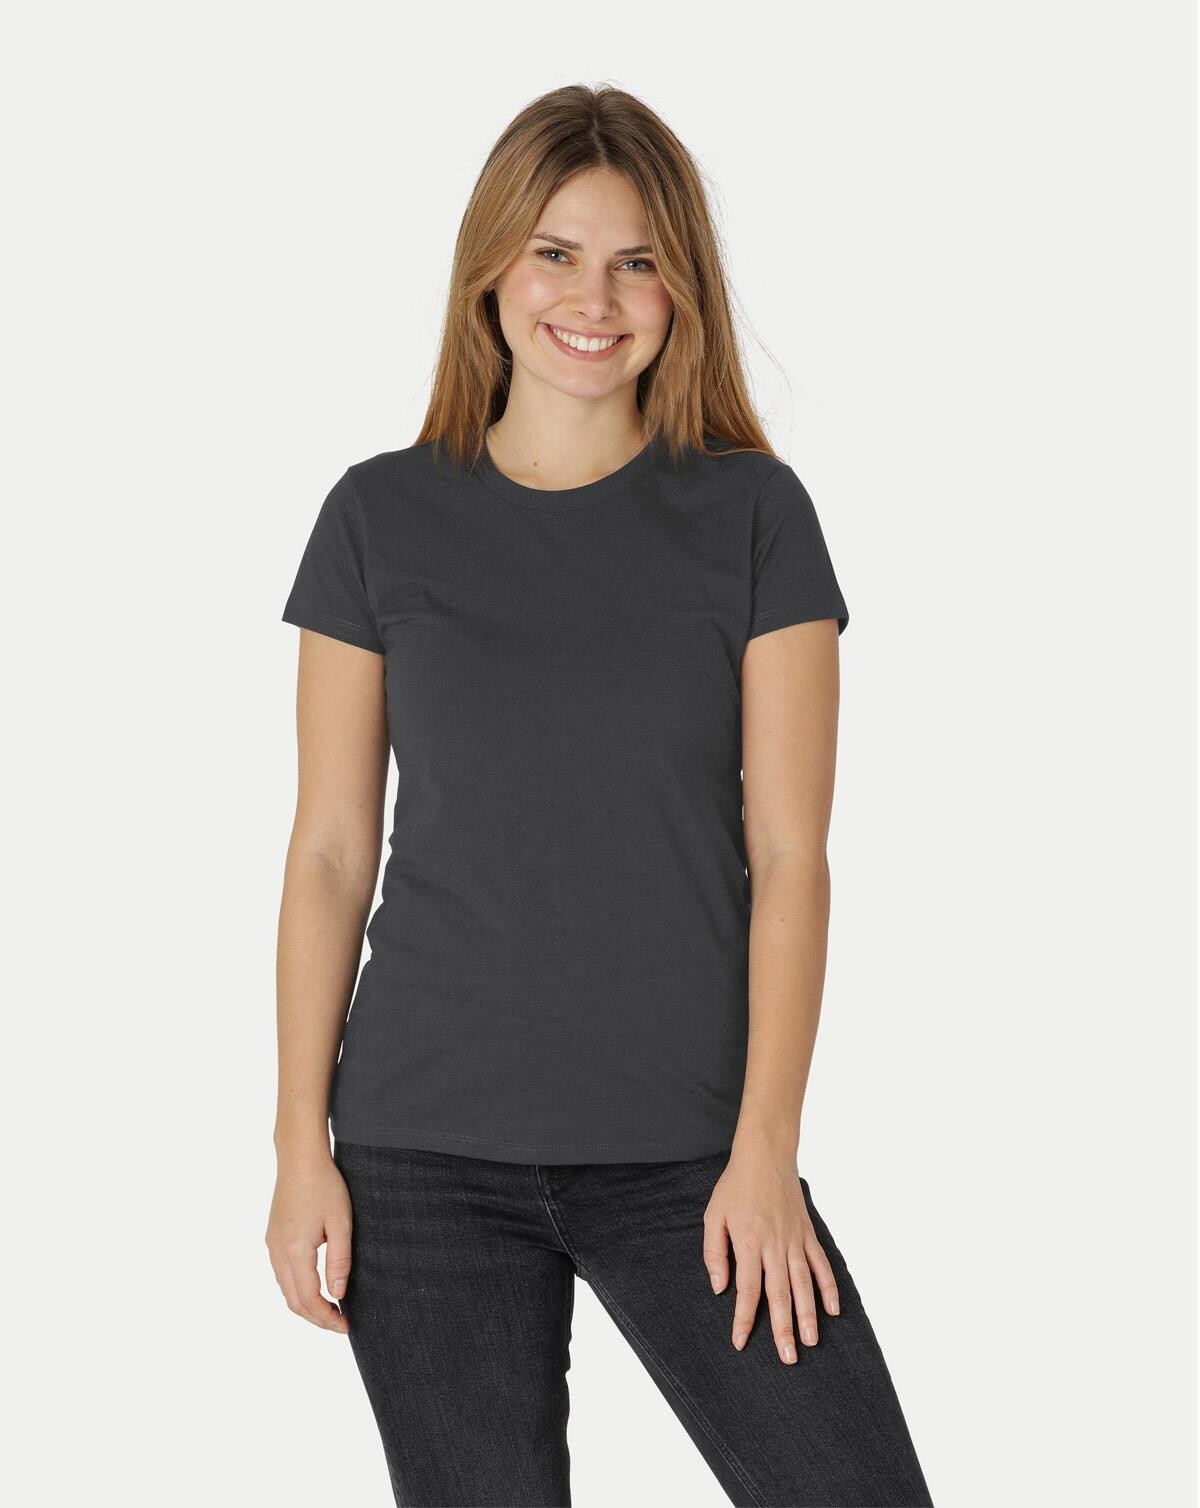 Billede af Neutral Organic - Ladies Fitted T-shirt (Charcoal, 2XL)